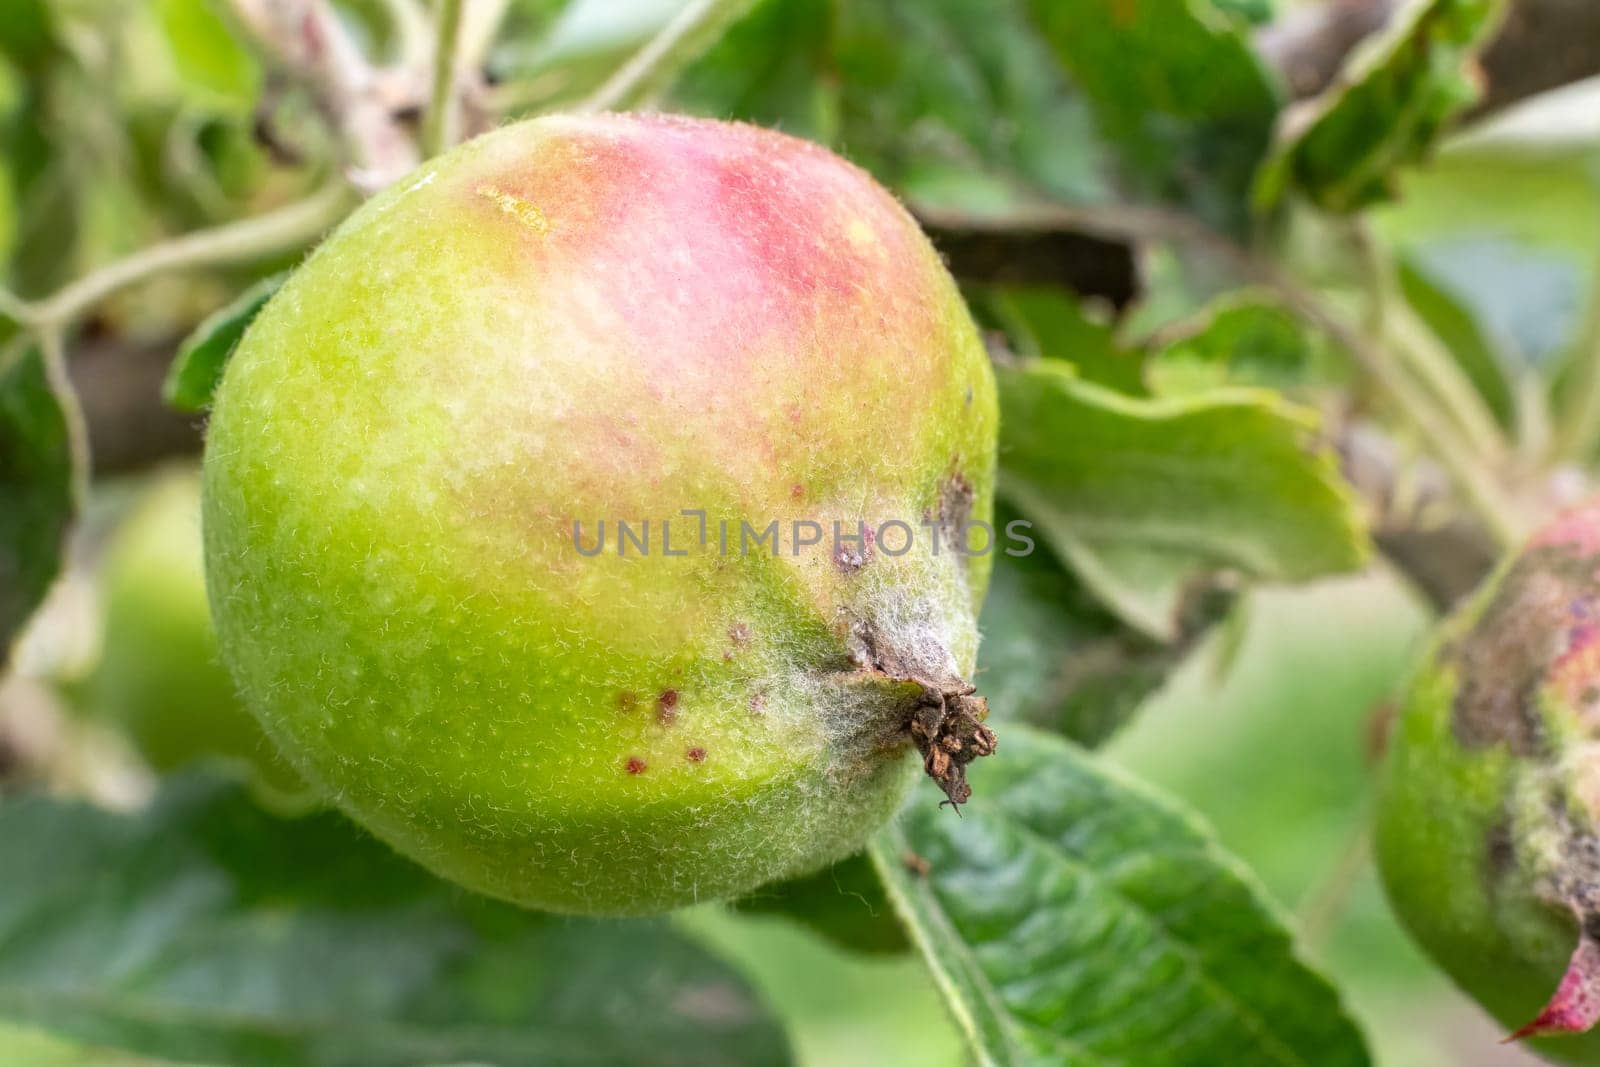 Fruit of immature apple on a branch of the tree in the orchard. Fruits growing in the garden.